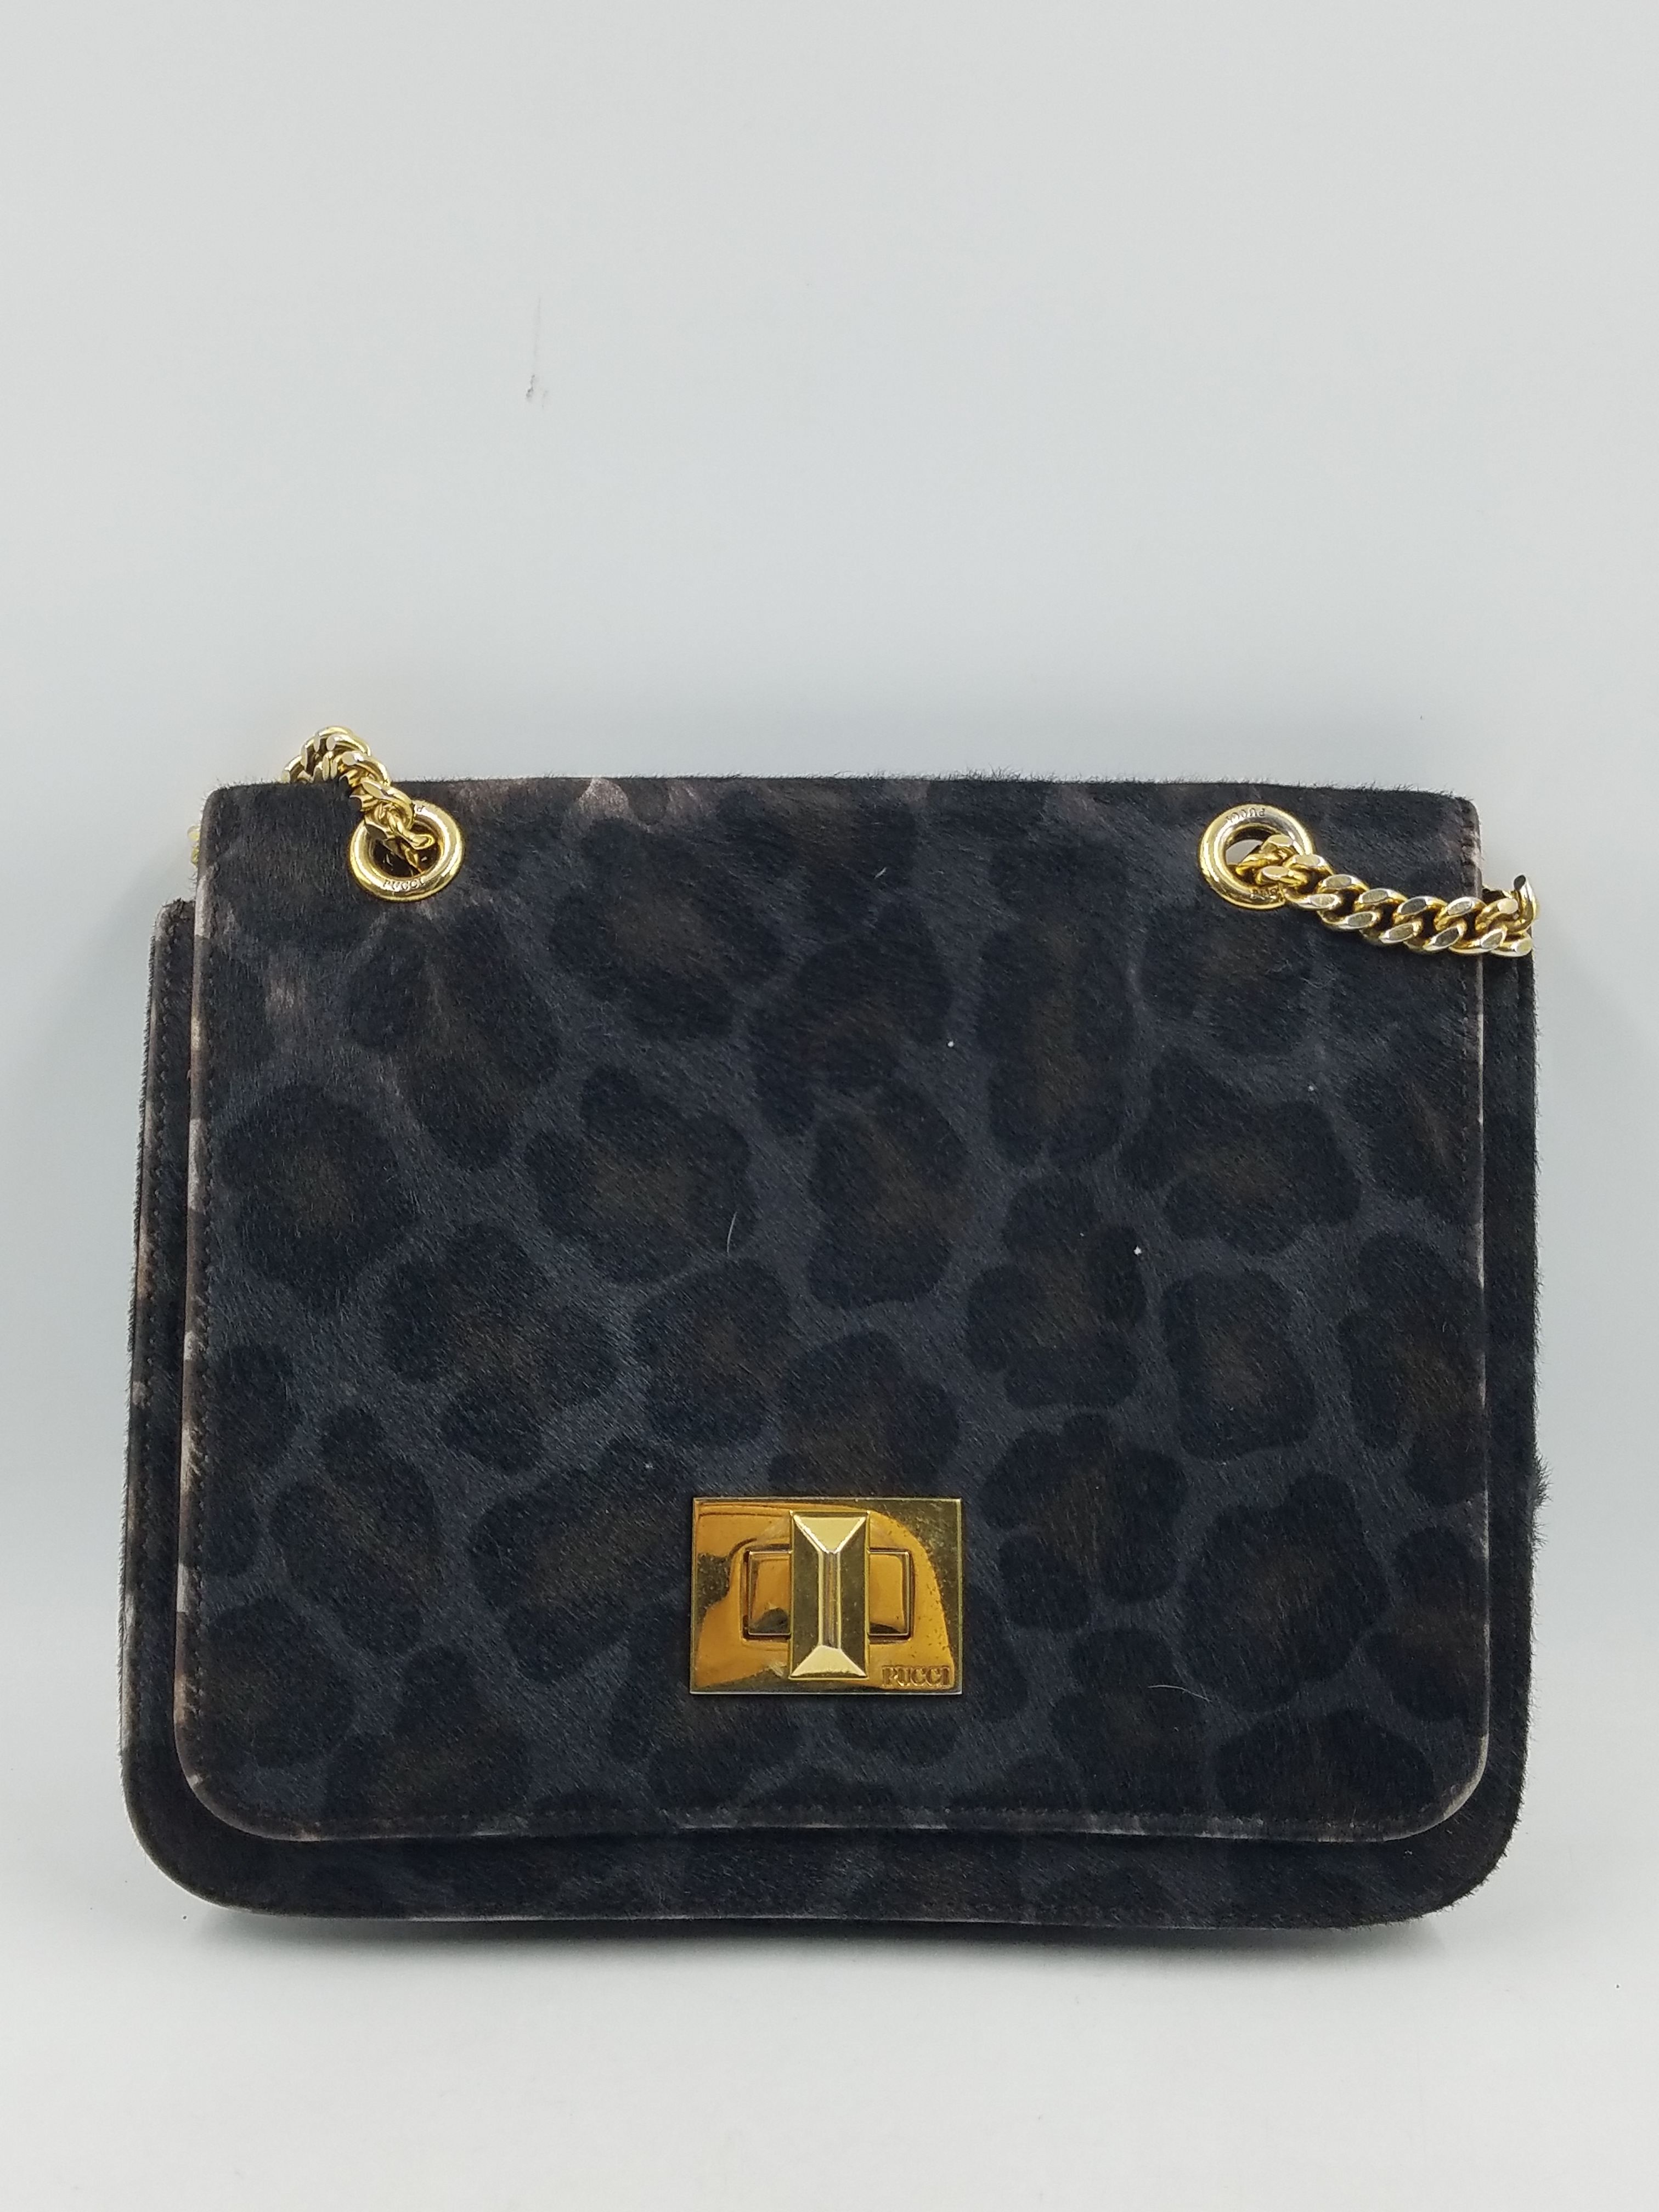 Buy the Authentic Pucci Brown Calf Leopard Shoulder Bag | GoodwillFinds